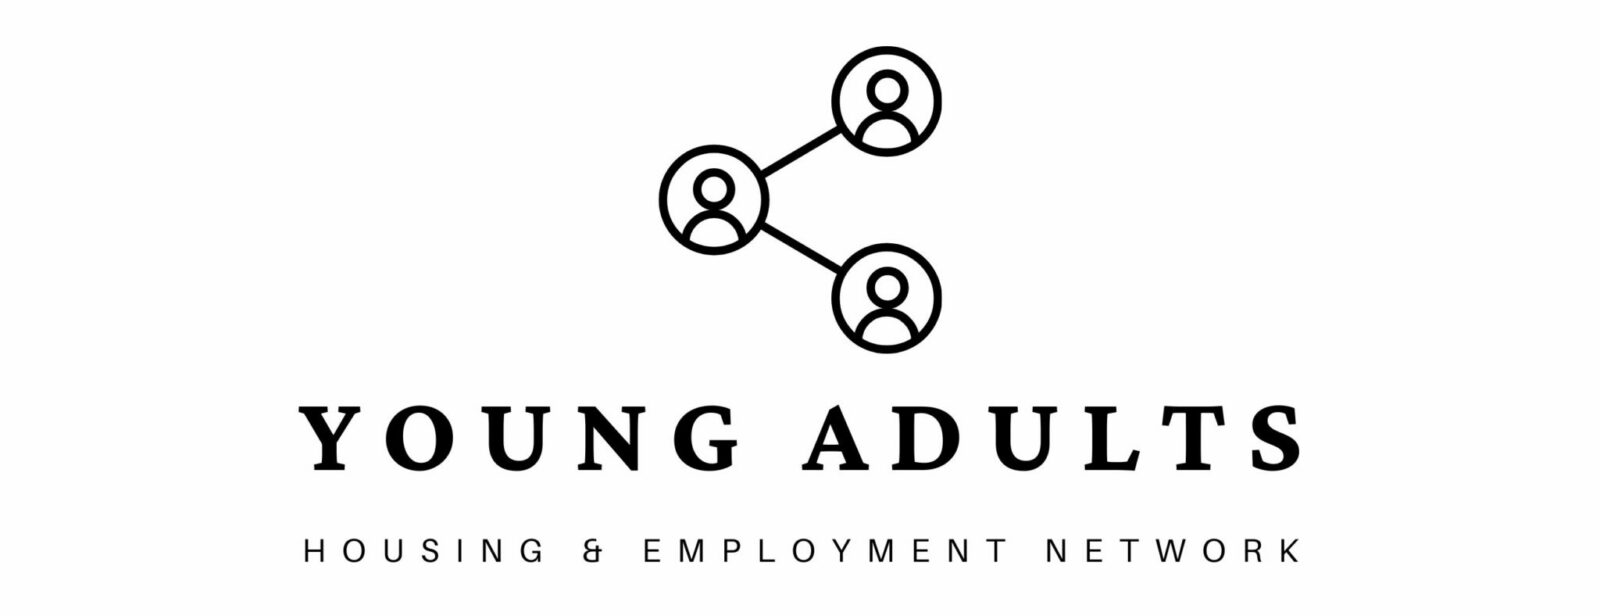 YA Housing and Employment Network Banner (1300 x 500 px)